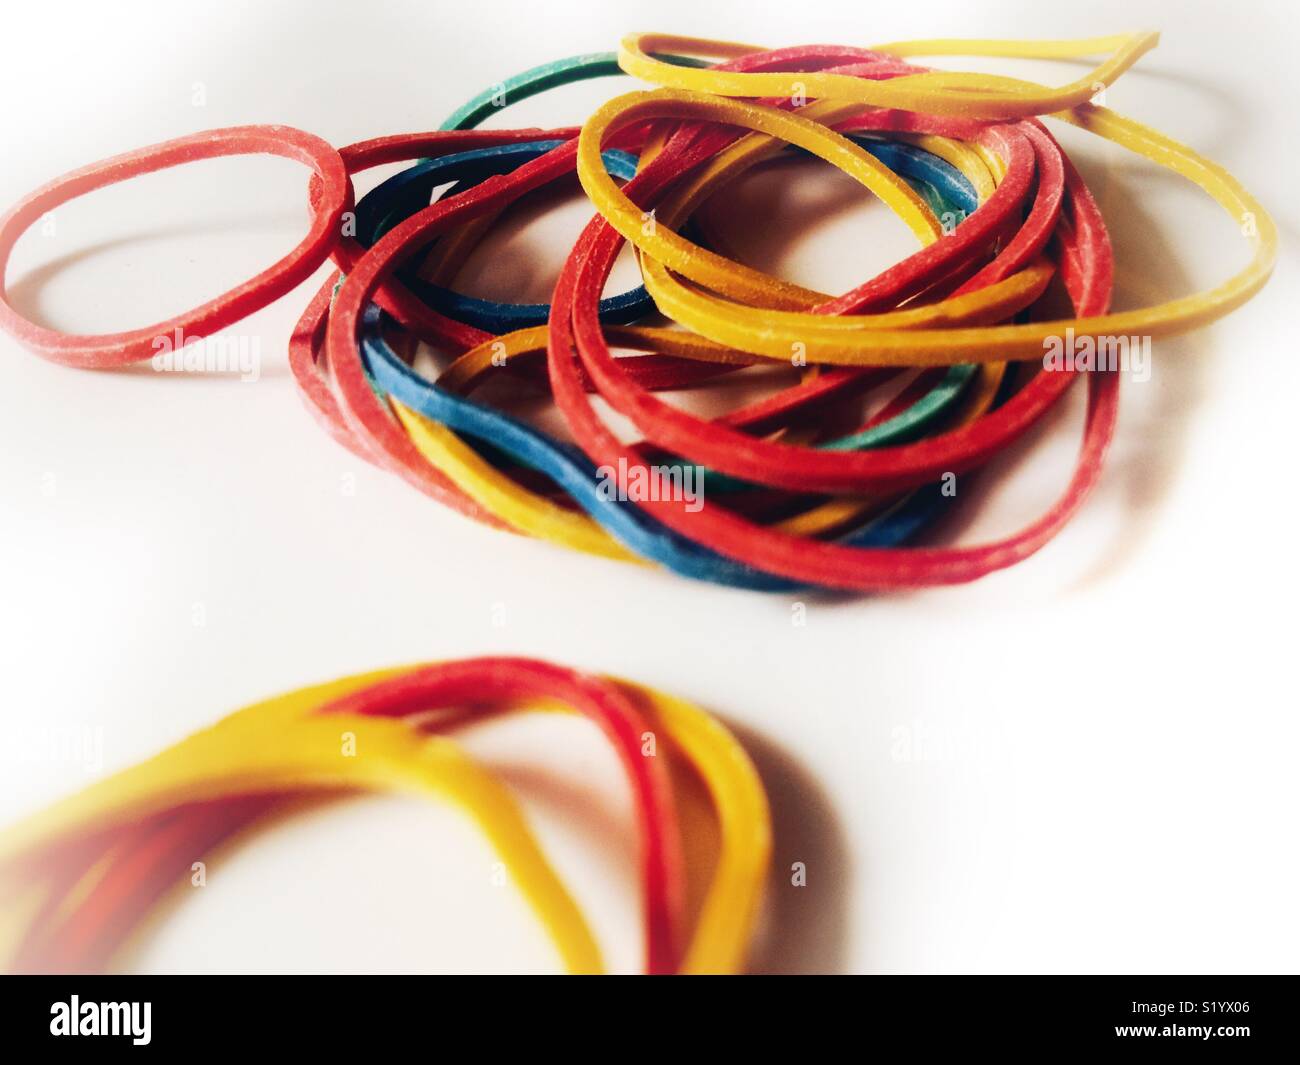 Pile of coloured rubber bands on white background Stock Photo